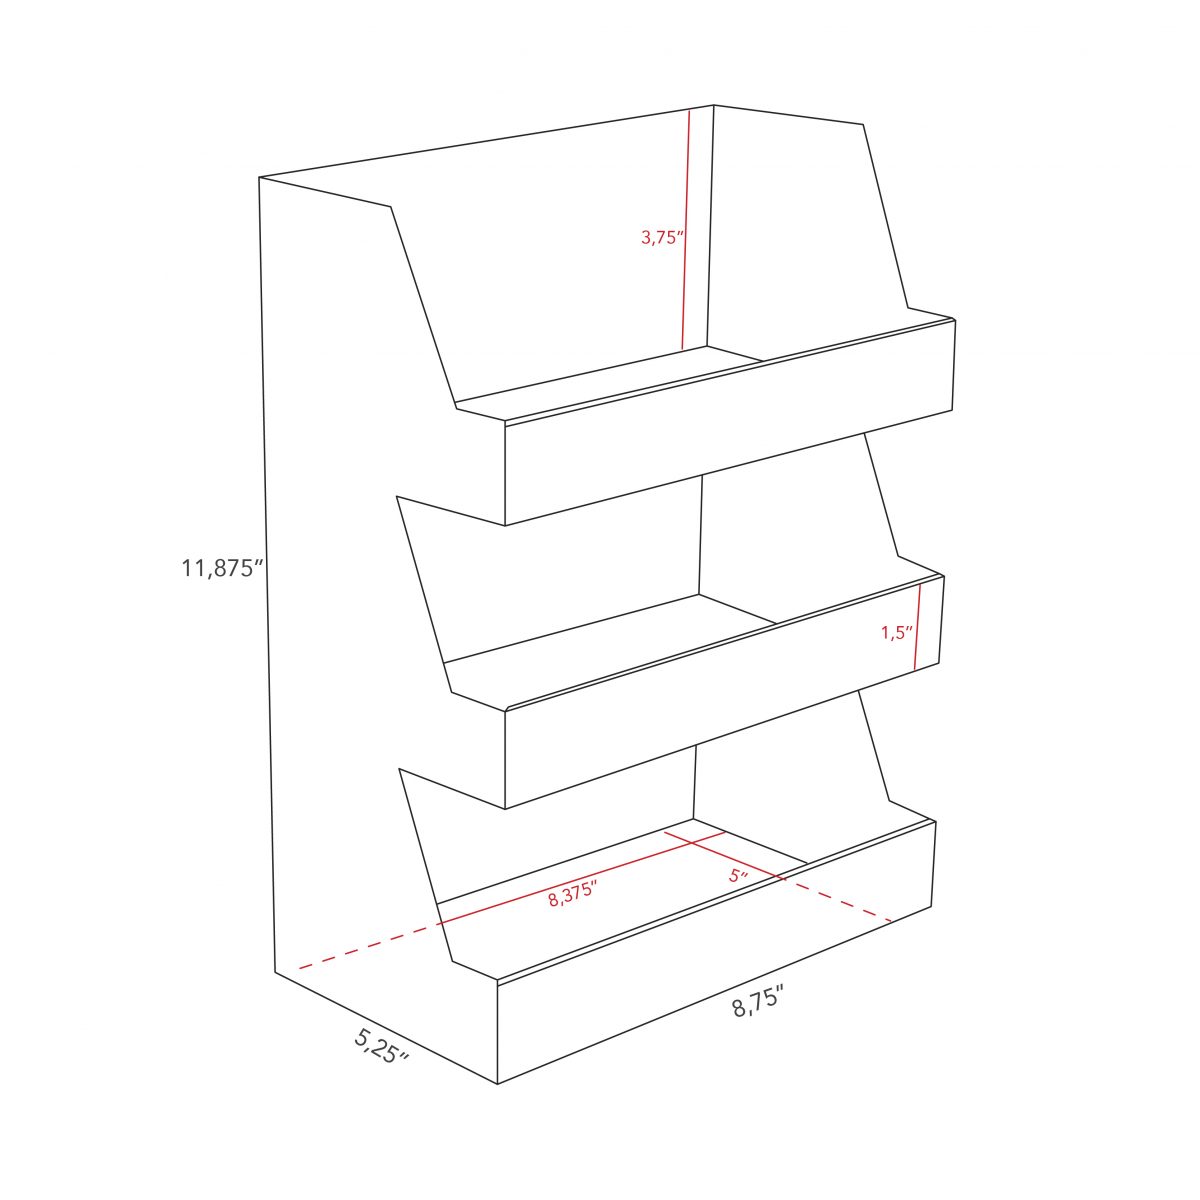 Cardboard counter display with 3 shelves - Dimensions